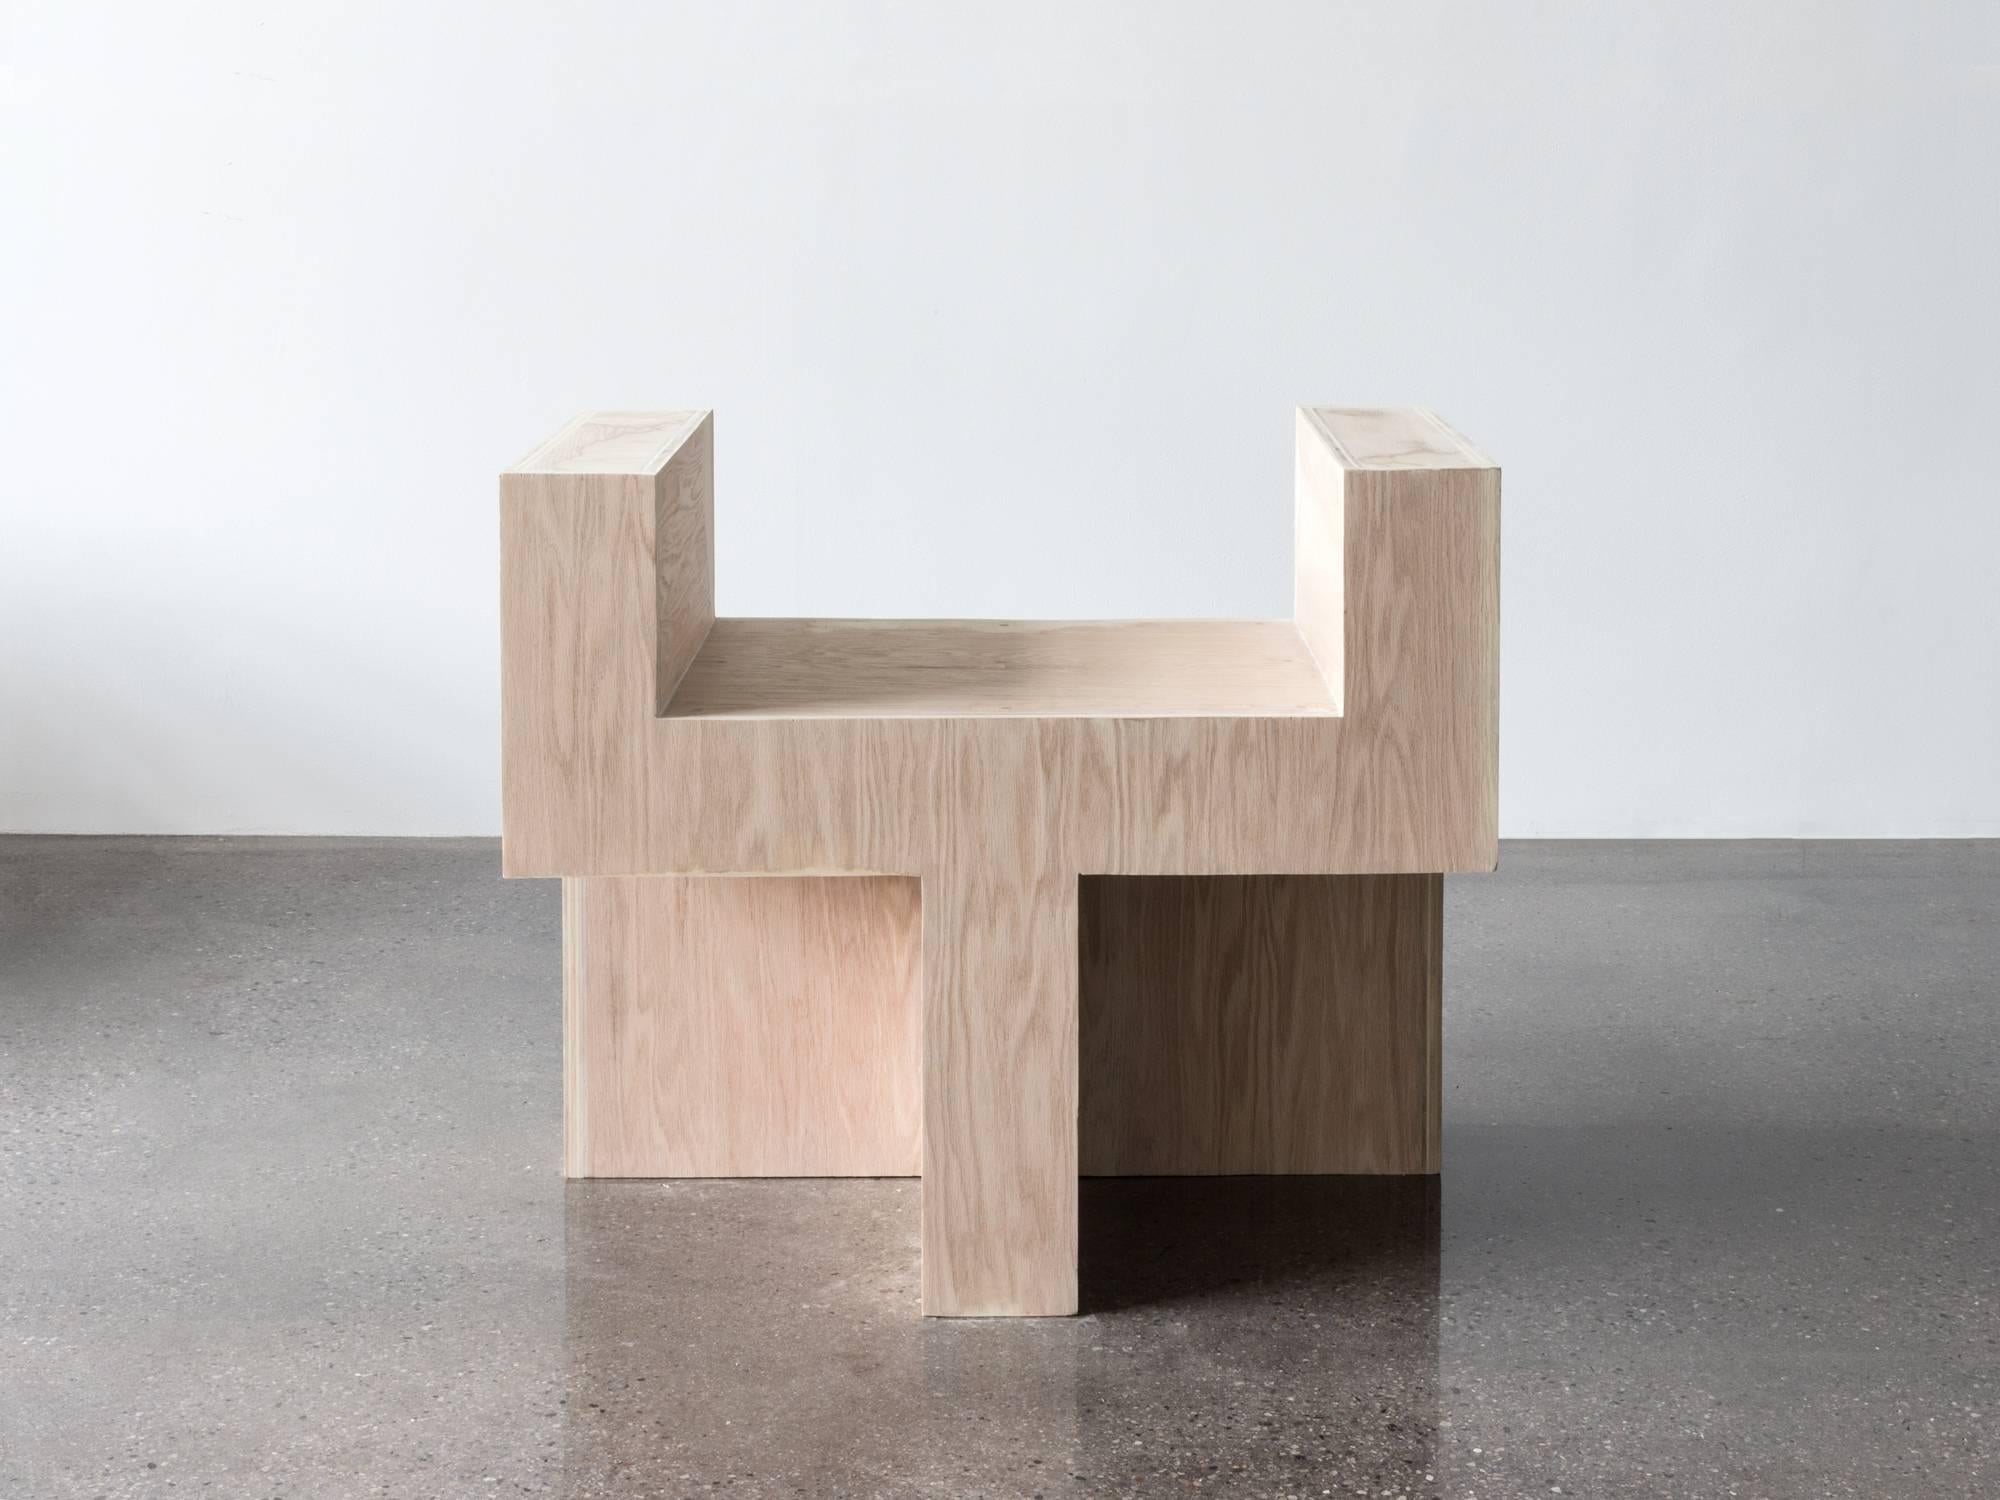 'Monument I' Minimalist Plywood Chair by Lukas Machnik in Natural or Ivory available from LMD/studio. 

Lukas Machnik is an interior designer by trade. Having worked in the field for over a decade, he recognized a gap in the market for